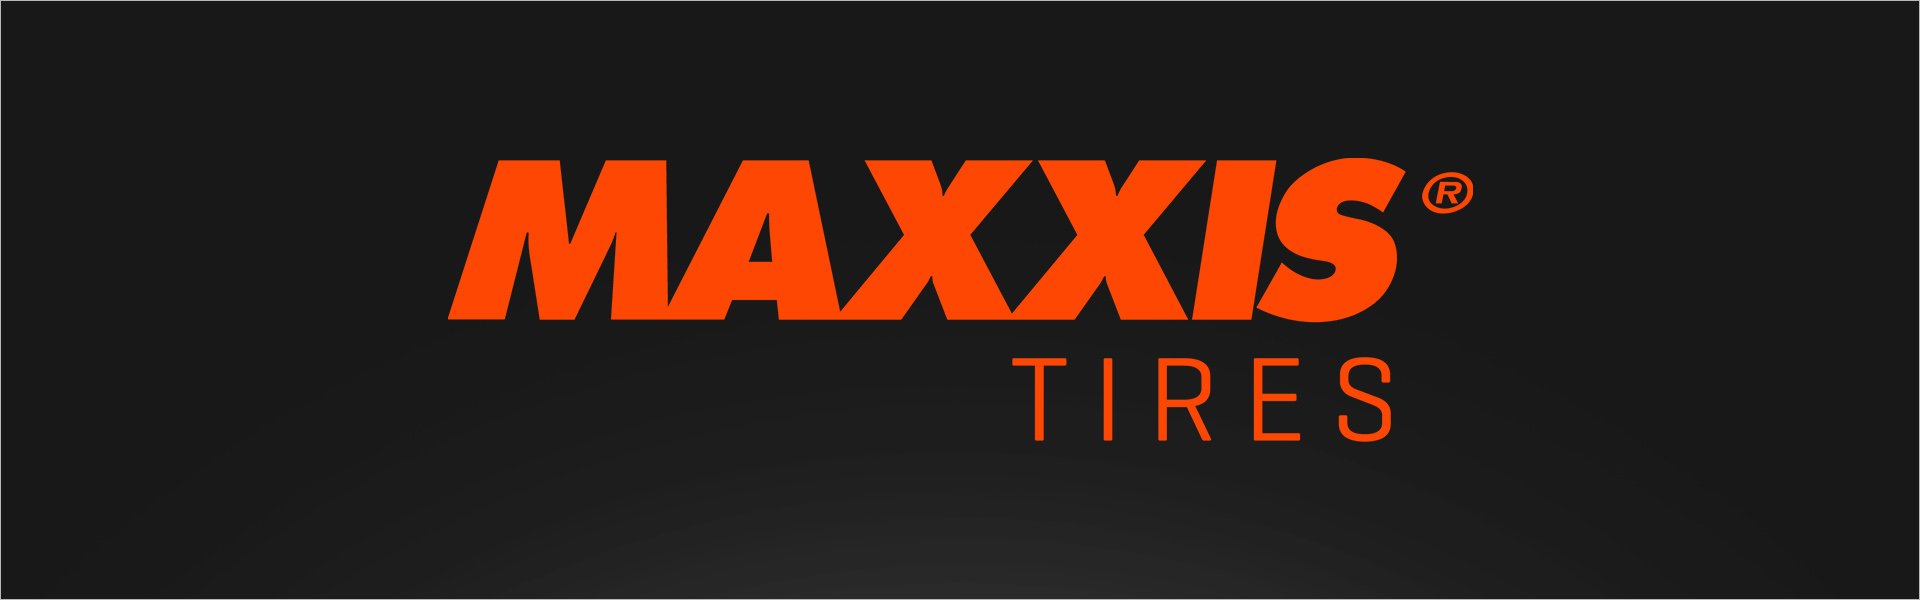 Maxxis ME3 185/70R13 86 H Maxxis